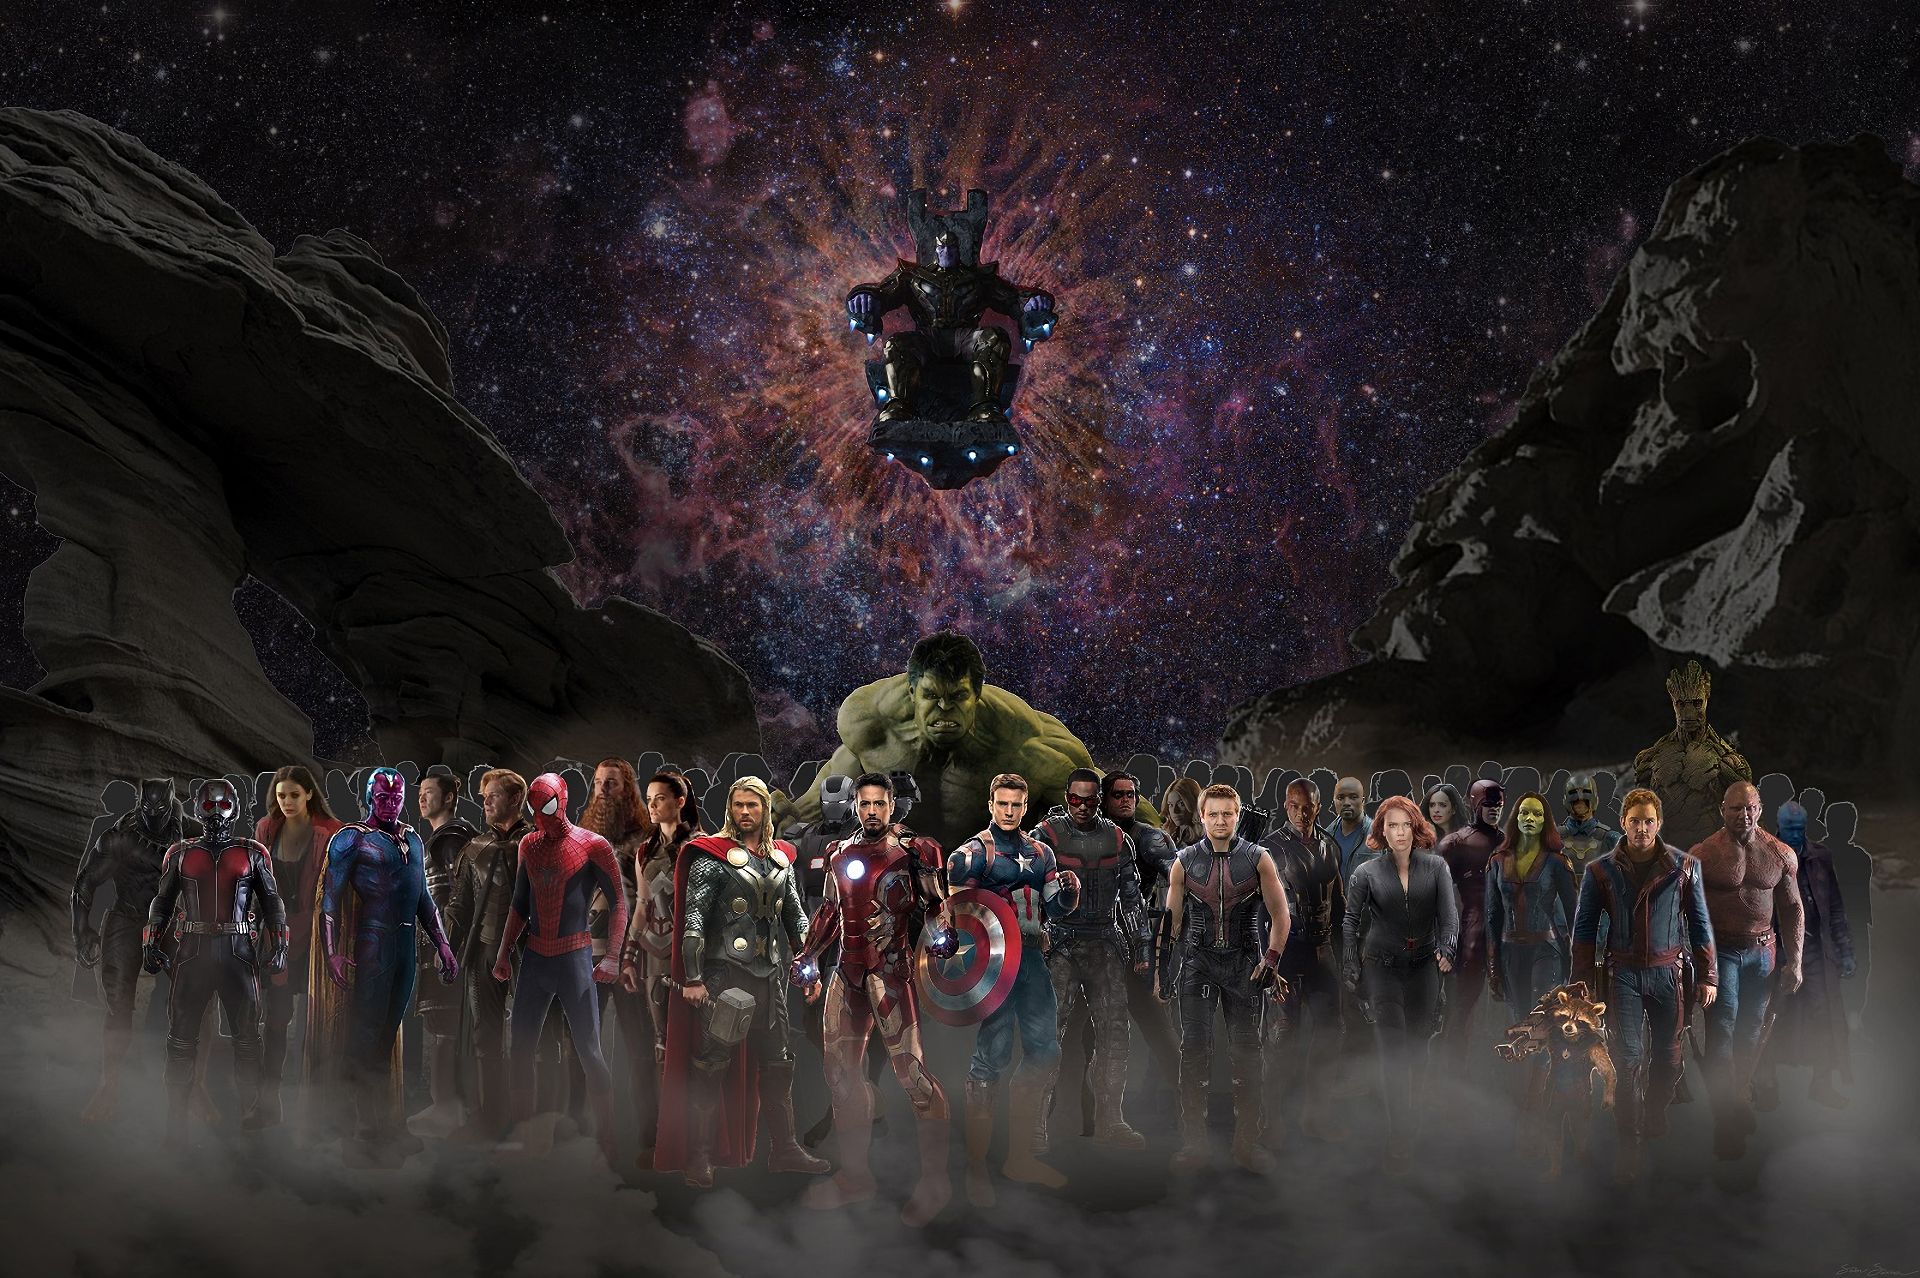 Avengers Infinity War Stunning HD Wallpapers [160 Img - Up to 12000px]